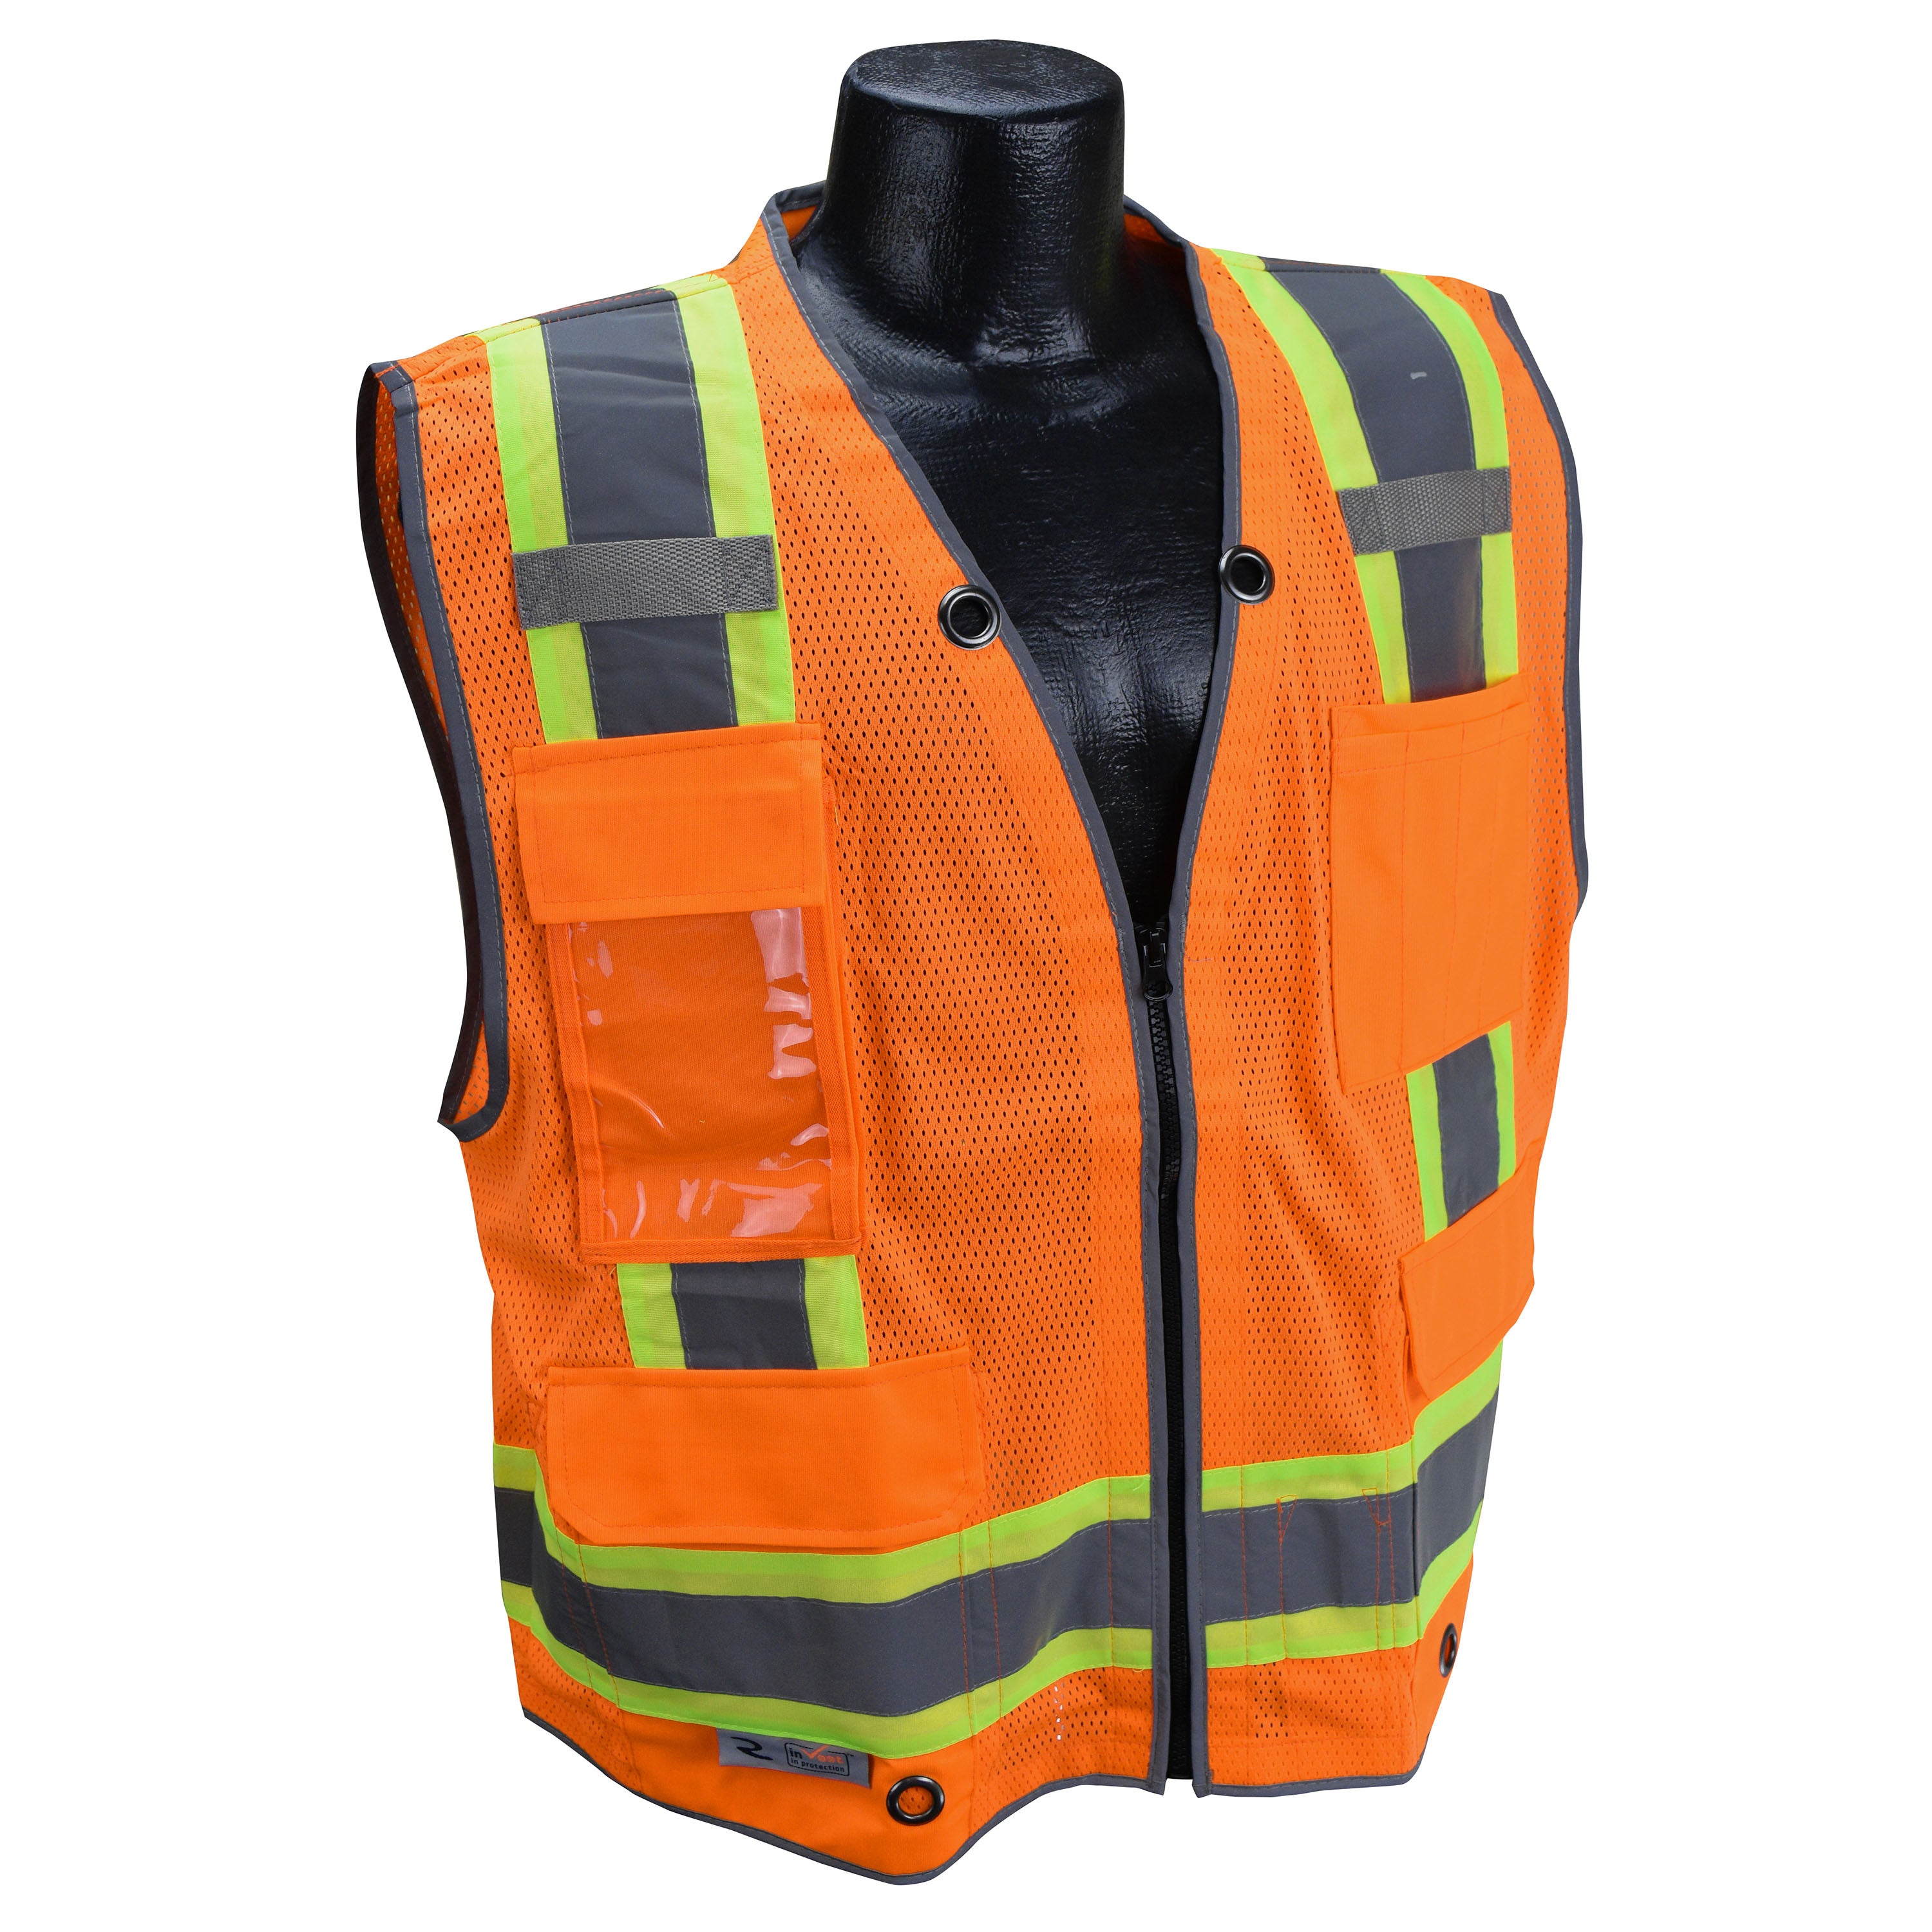 Radians SV6H Type R Class 2 Heavy Duty Two Tone Mesh Surveyor Vest with Solid Pockets-eSafety Supplies, Inc